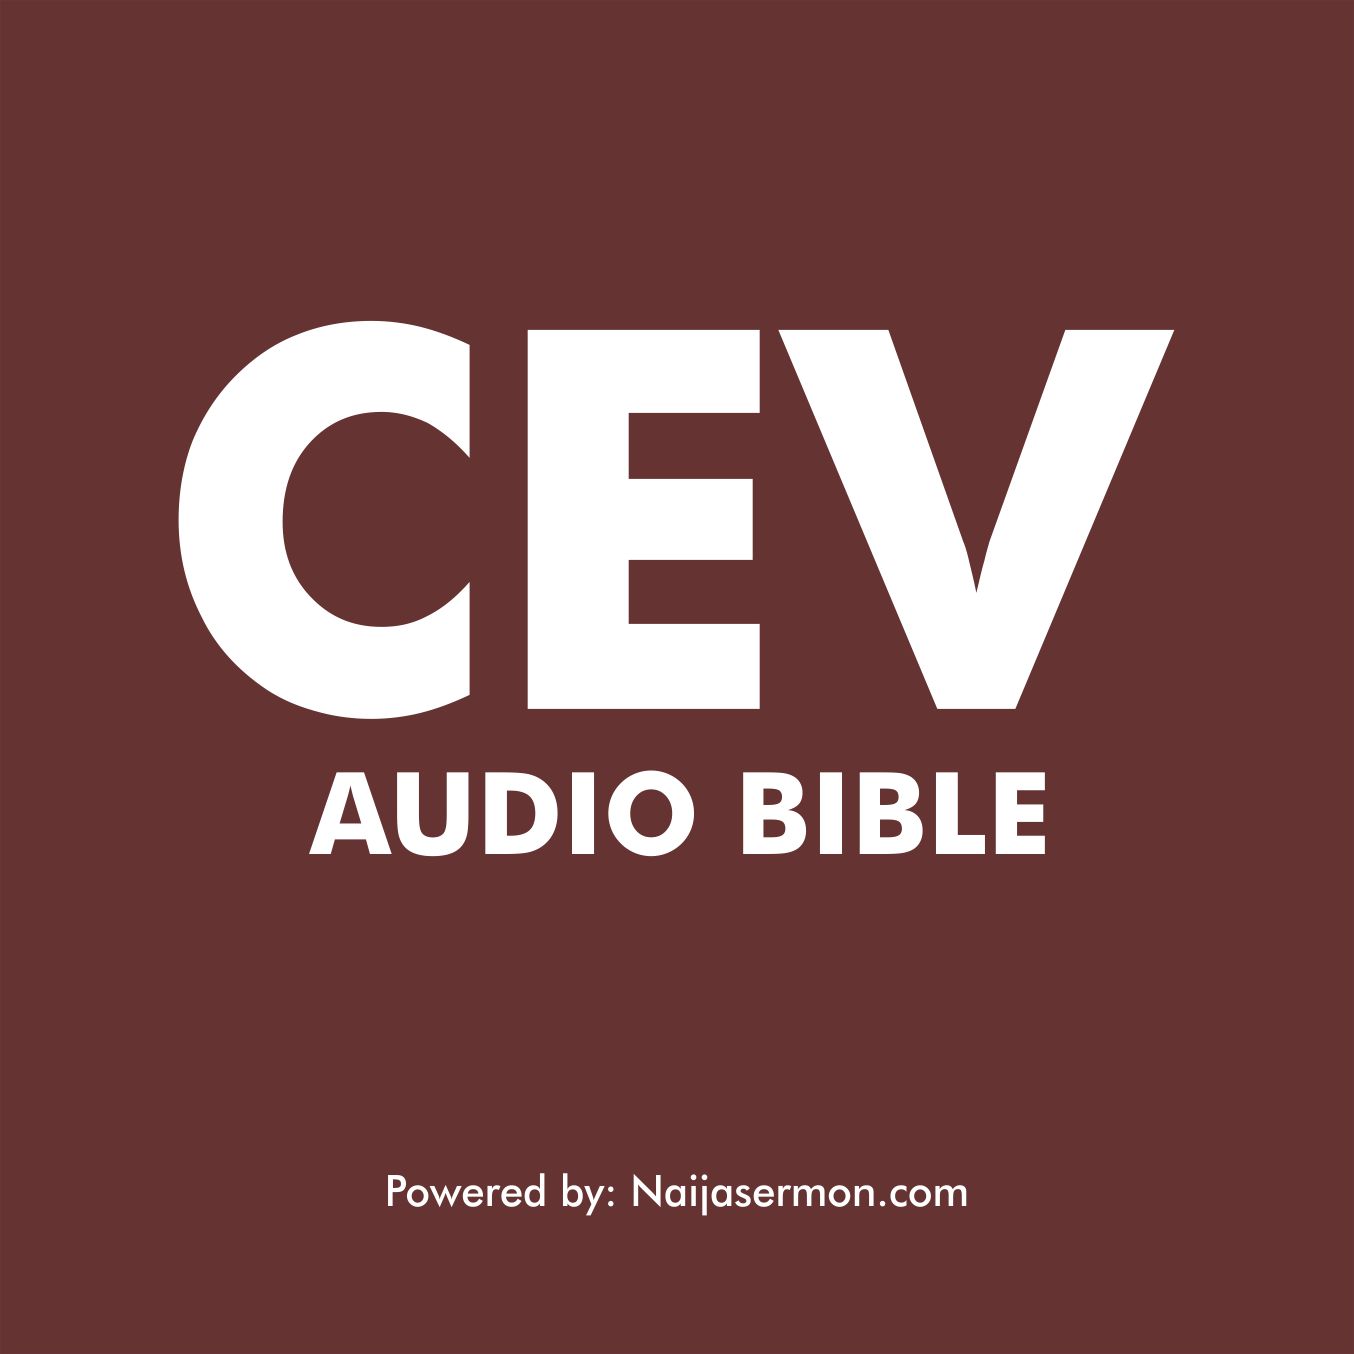 [Free] Download Contemporary English Version (CEV) Audio Bible MP3 - Dramatized 18